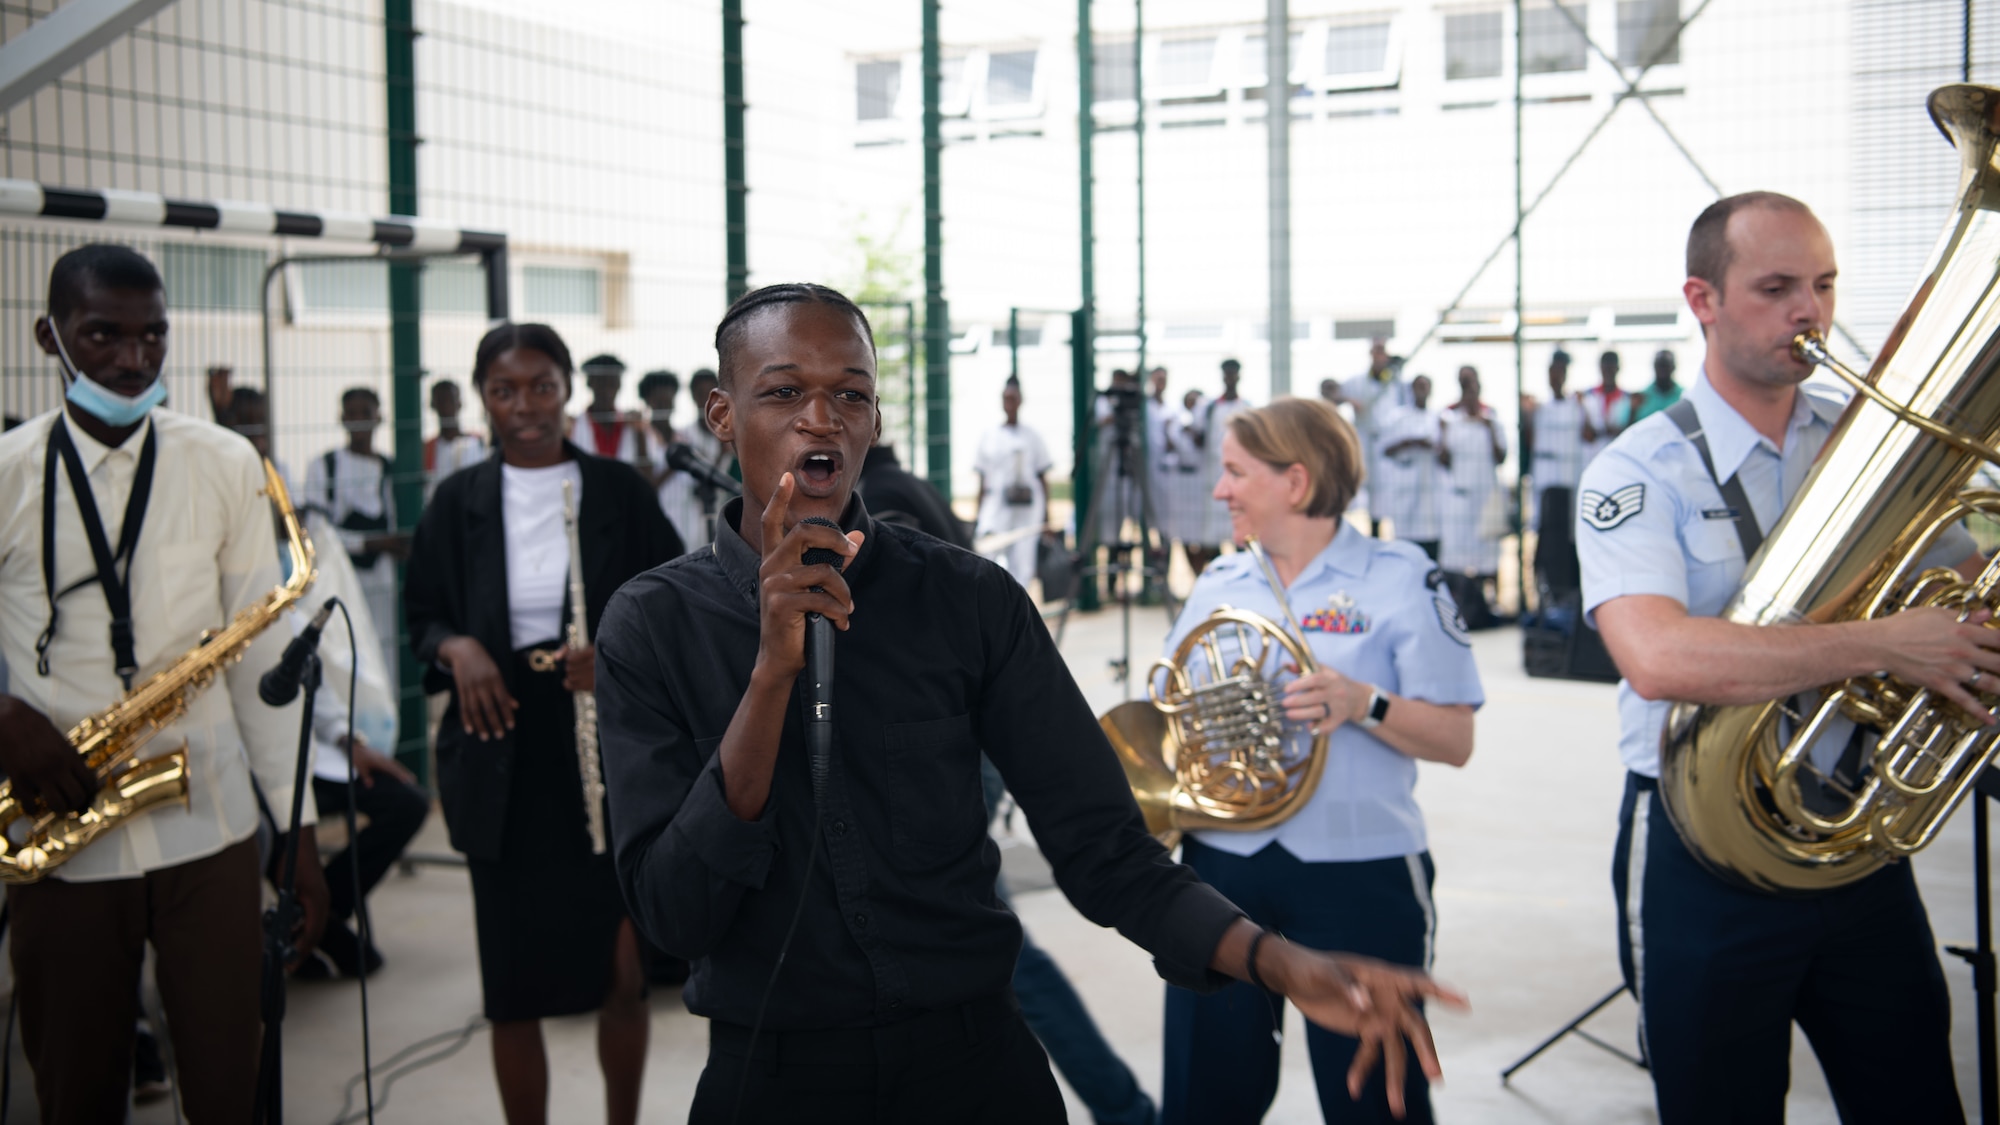 U.S. Airmen with the USAFE-AFAFRICA Band’s perform alongside students from the Polytechnic Institute of Art in Kilamba, Angola.